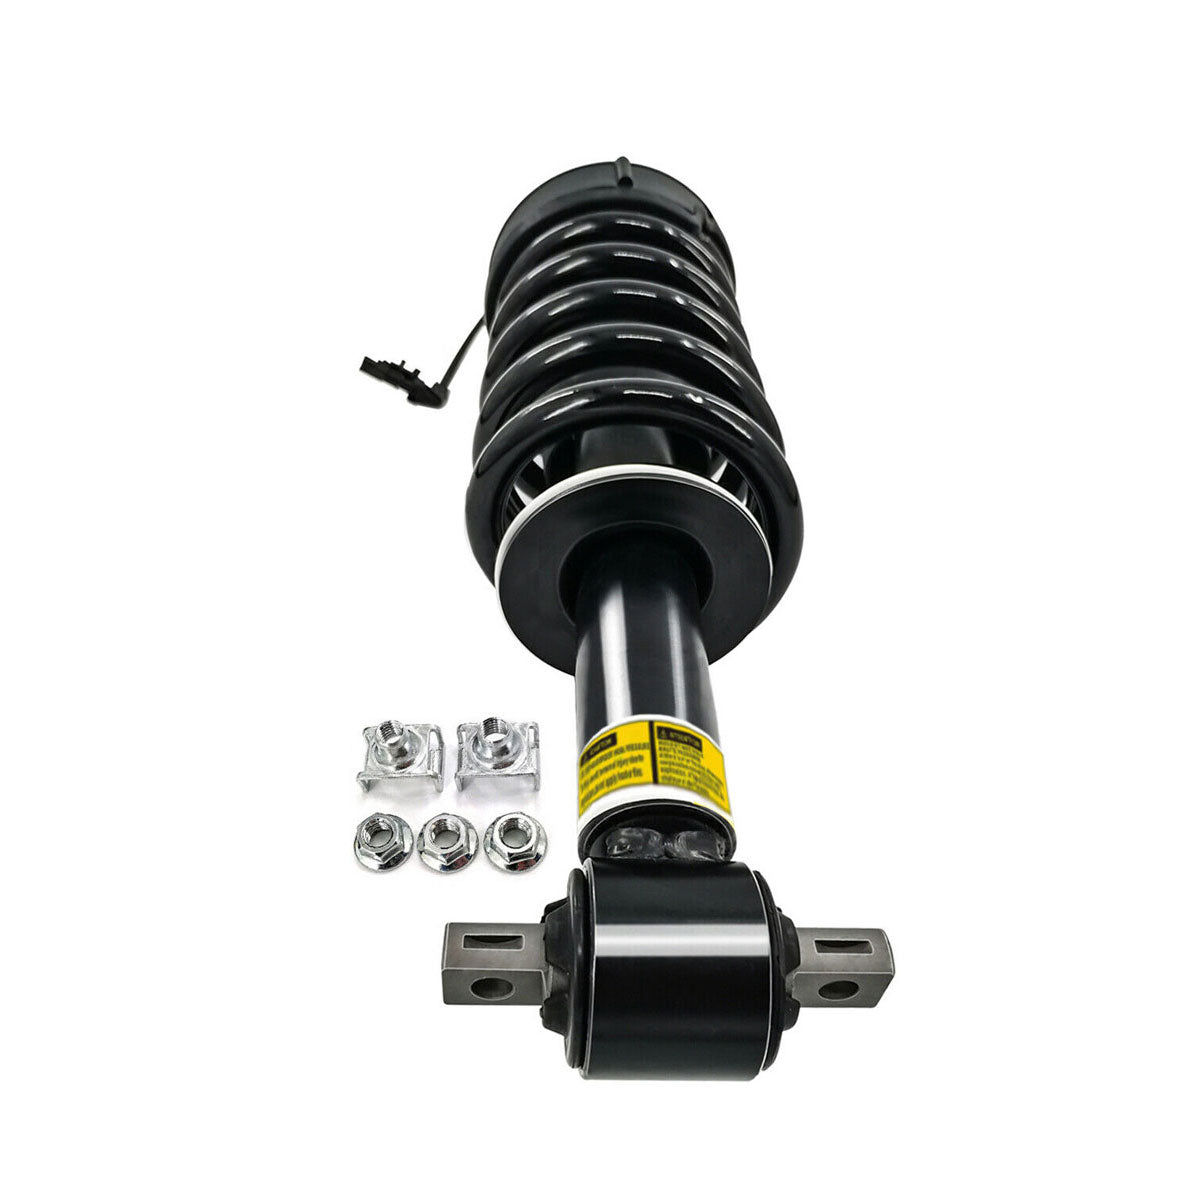 2015-2019 GMC Yukon Denali Strut Assembly Front Shock Absorber with MAGNETIC Ride Control 84061228 ACDelco5801108